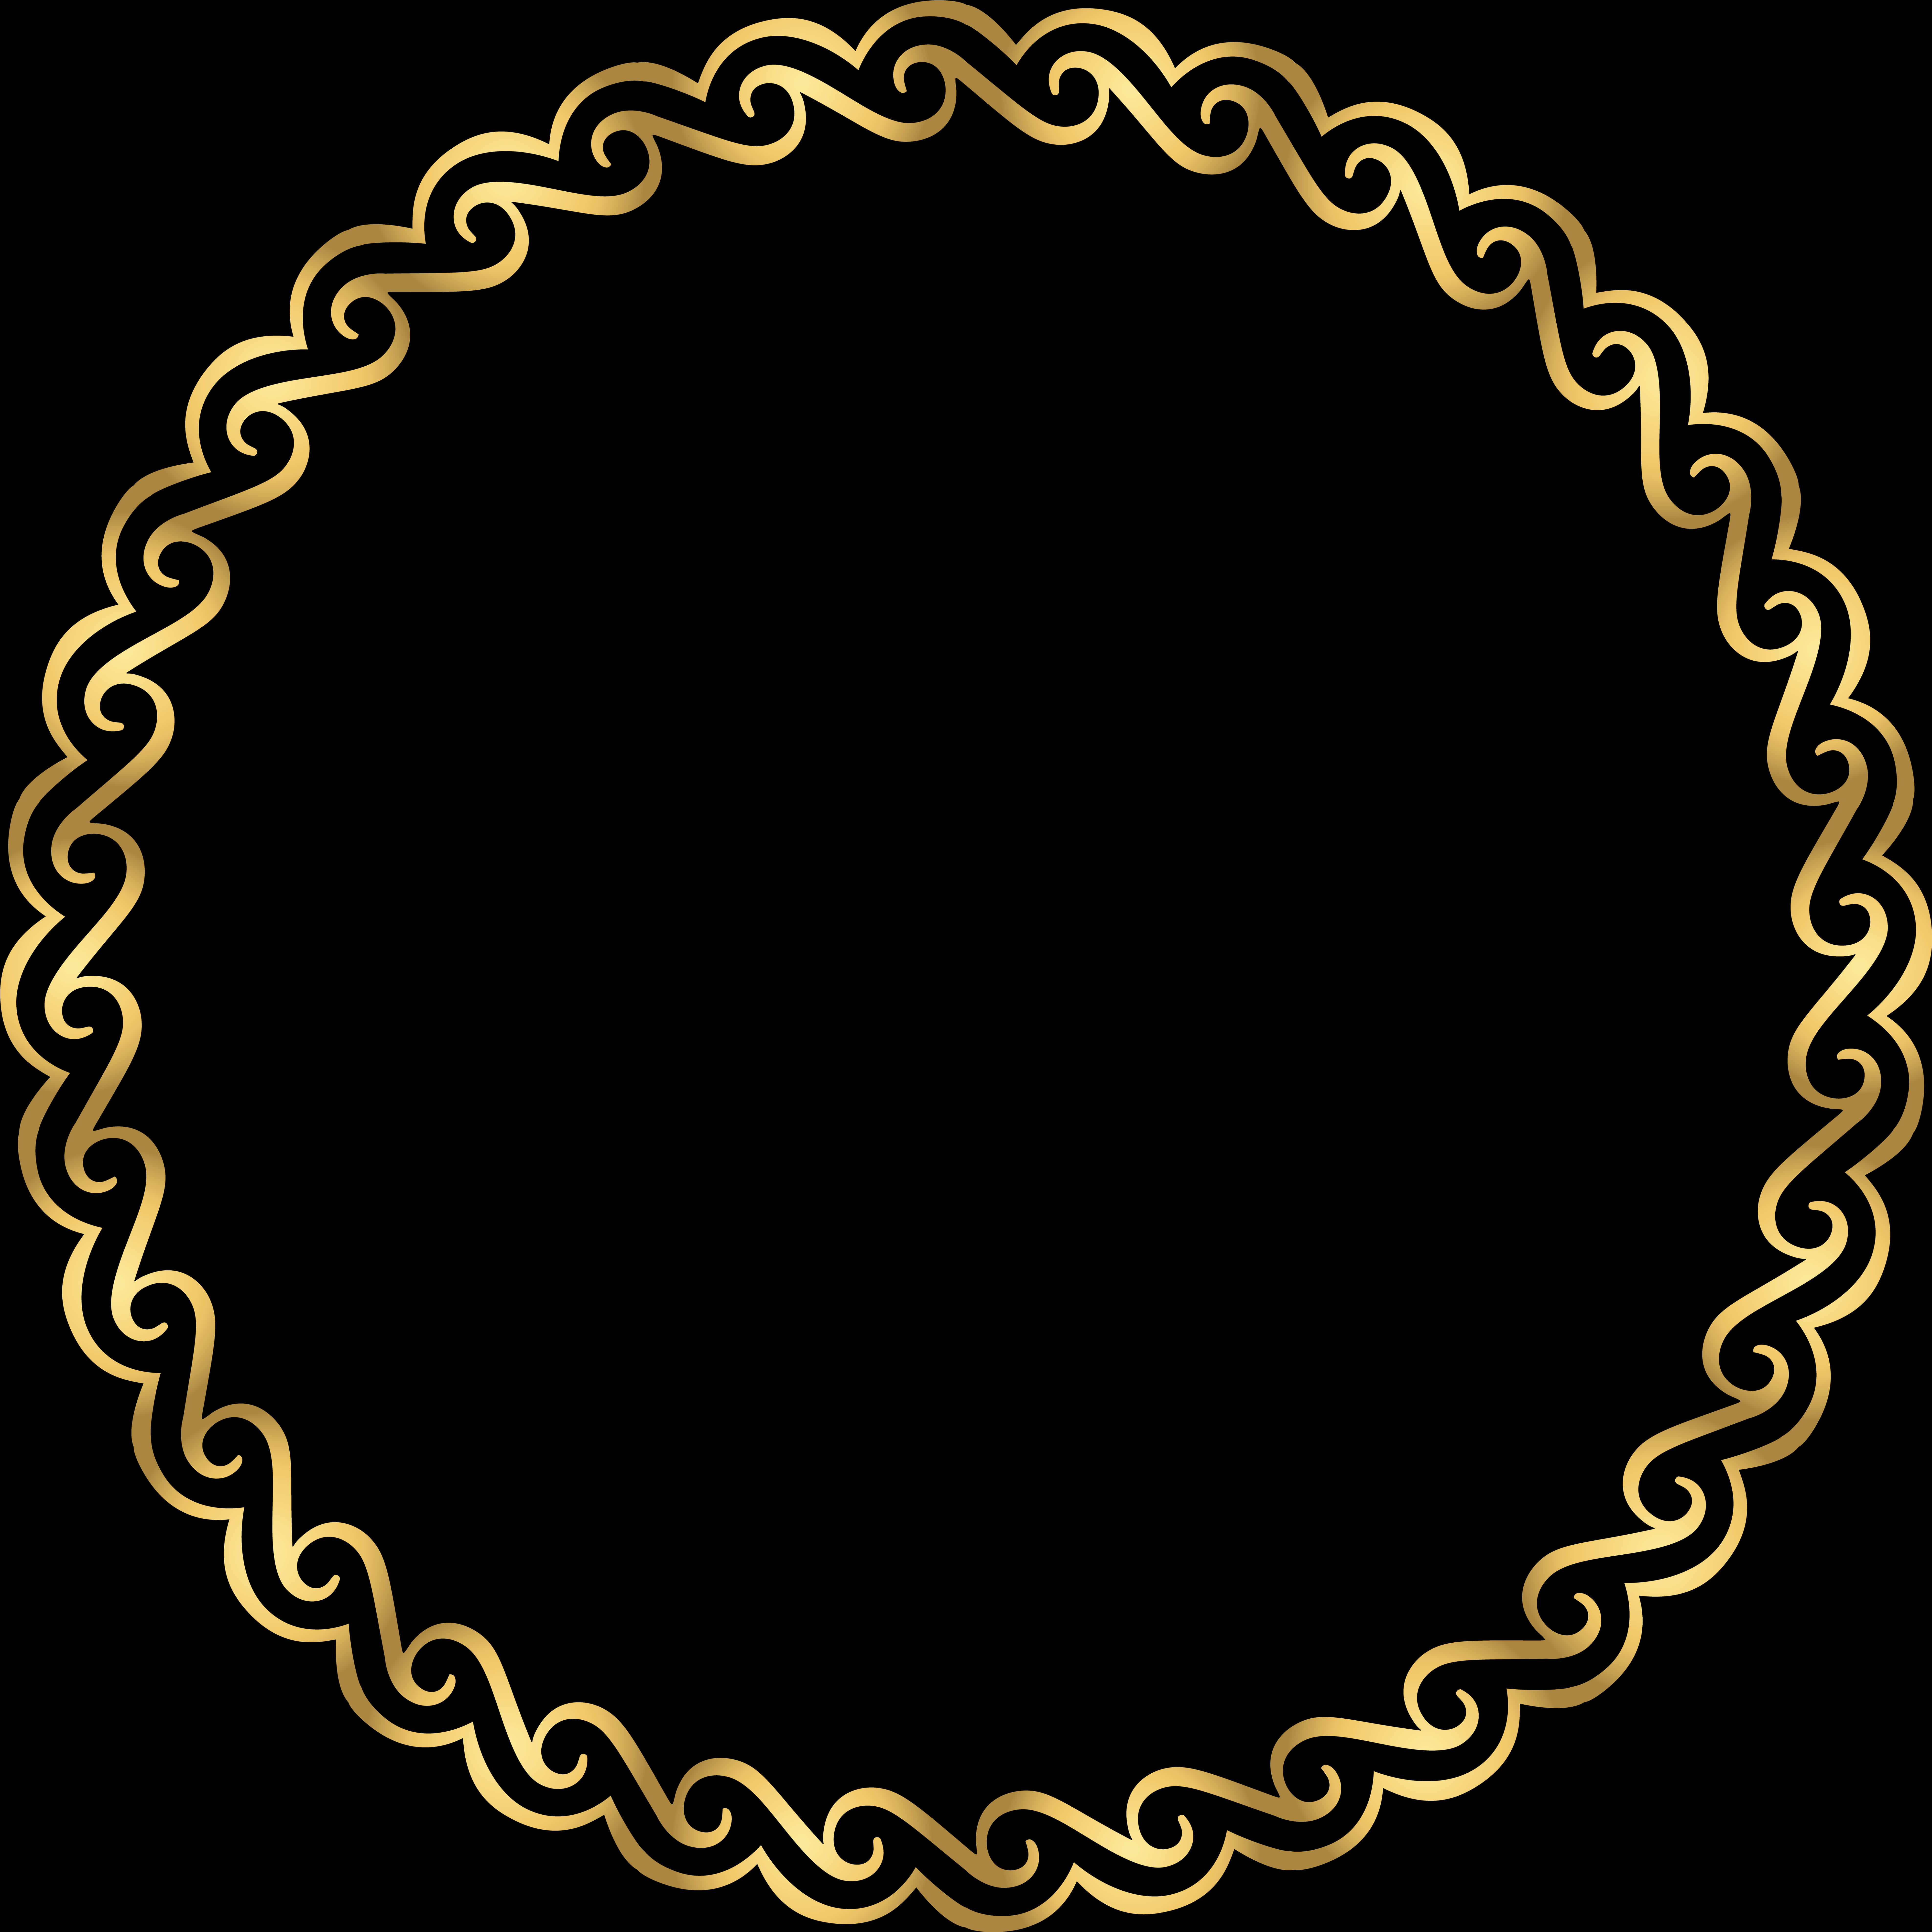 A Gold Circular Frame With A Black Background